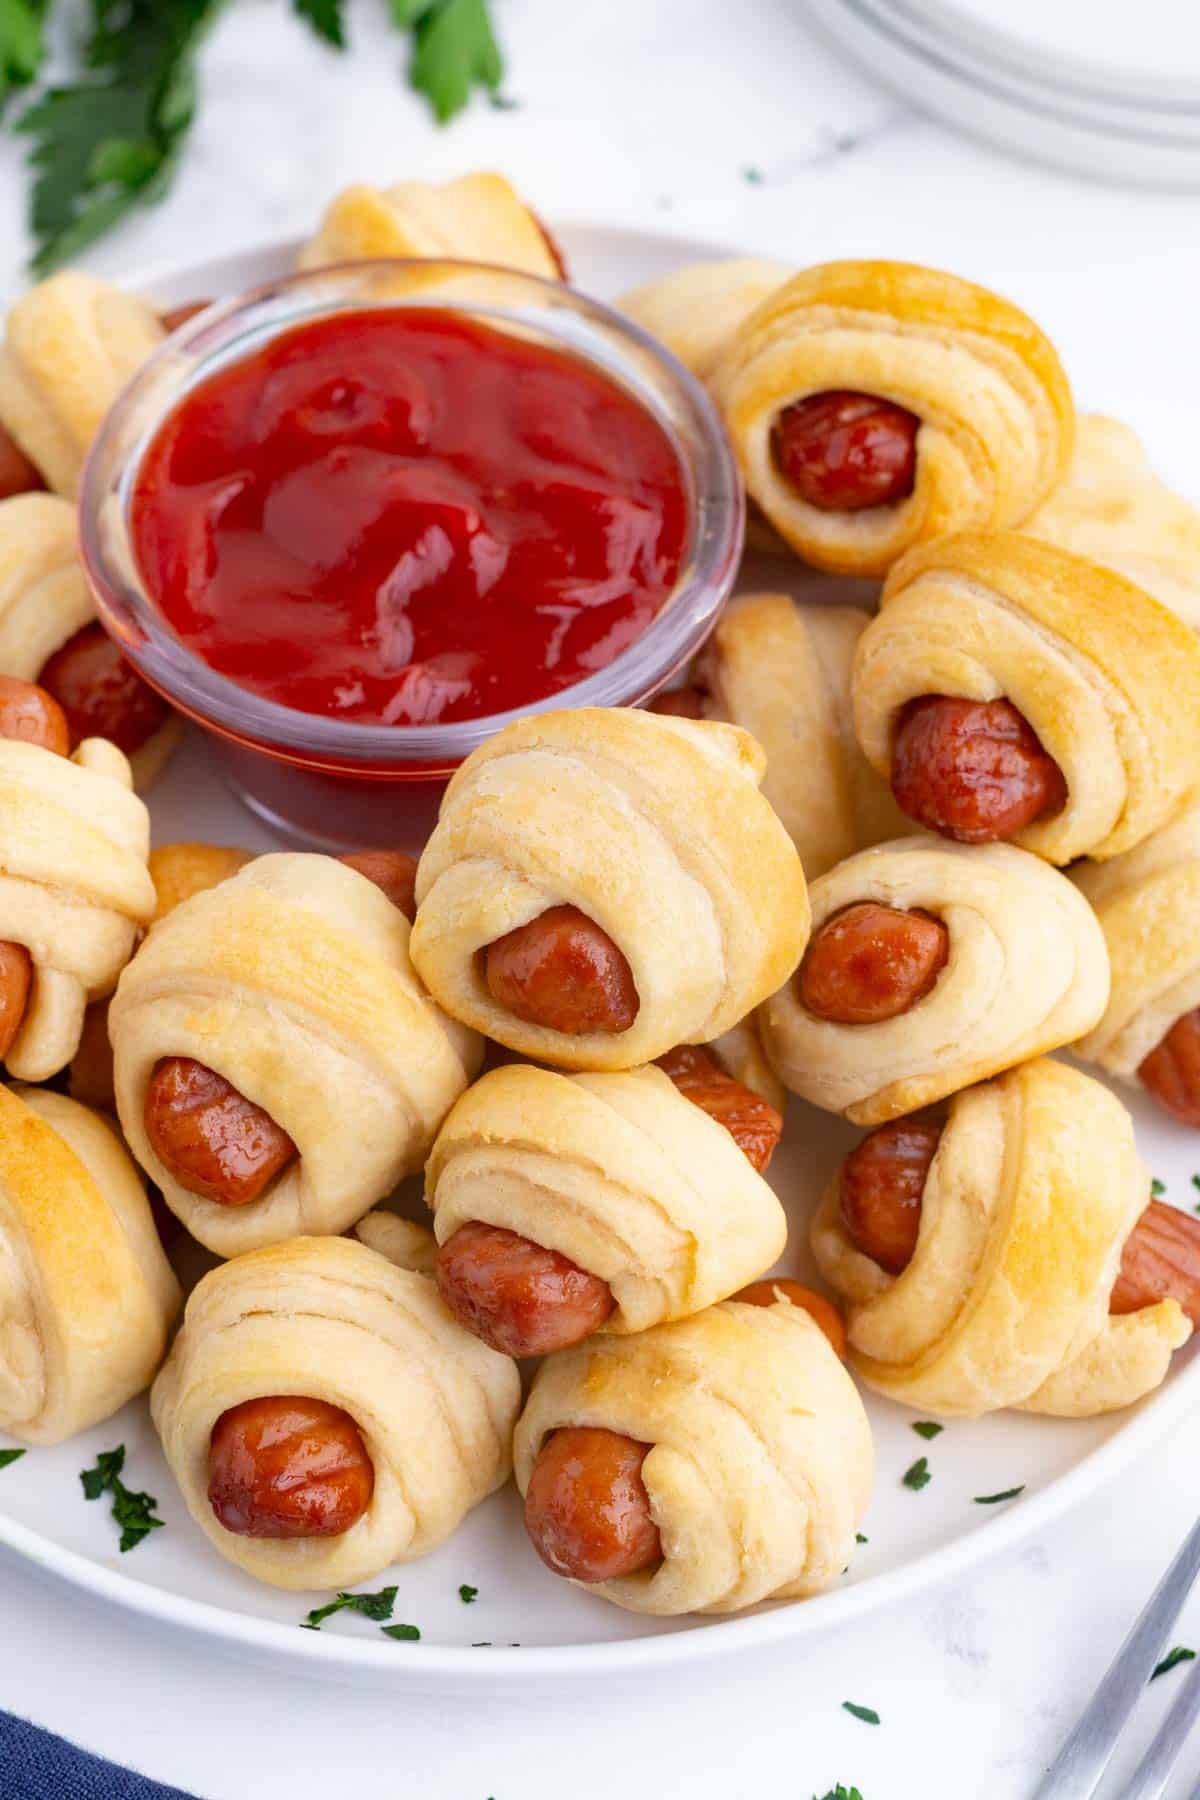 Pigs in a blanket, wrapped in crescent rolls, are served with a dish of ketchup.